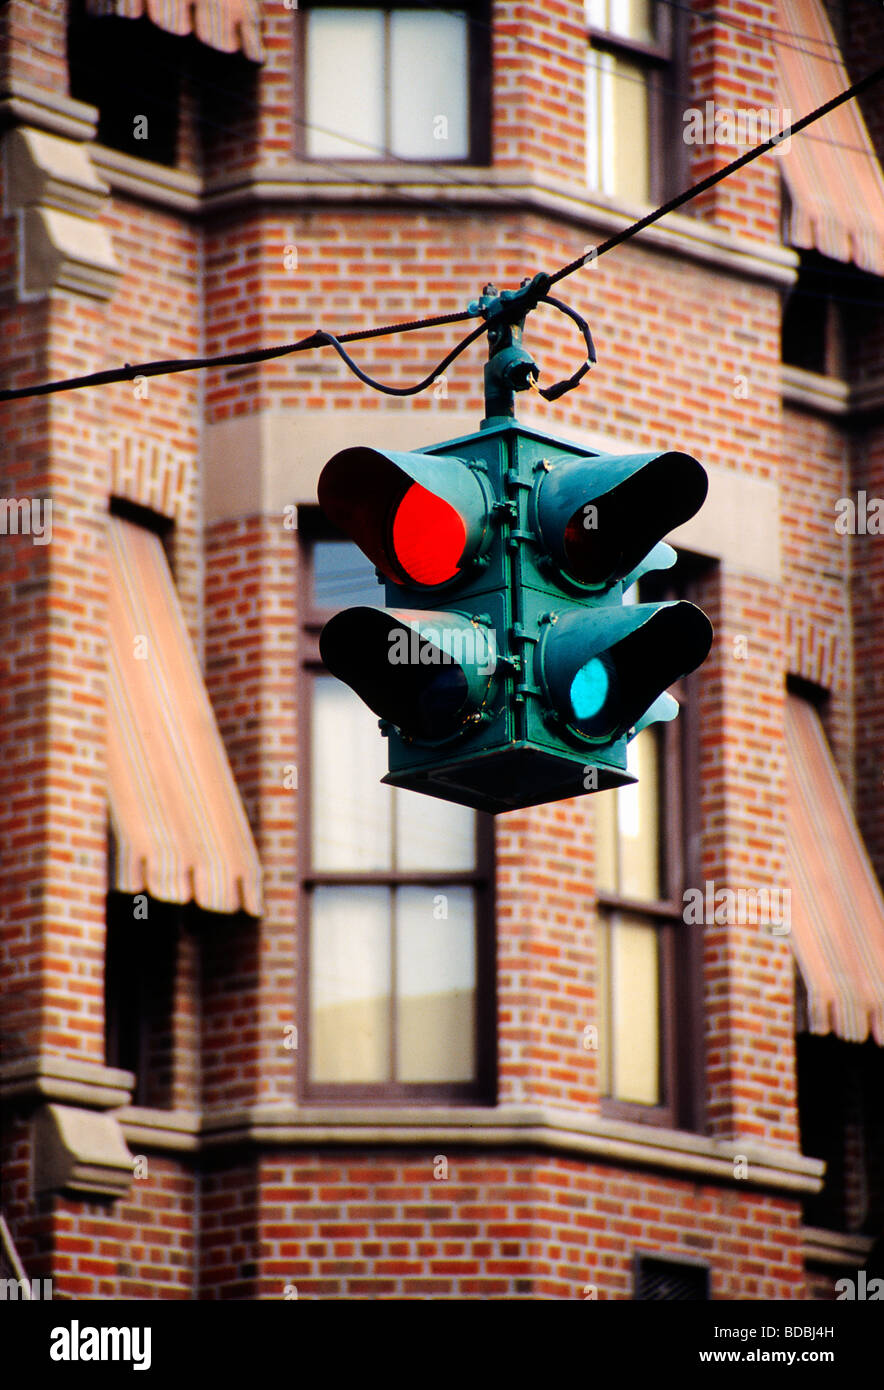 old-fashioned-traffic-light-hanging-from-cable-and-red-brick-building-BDBJ4H.jpg